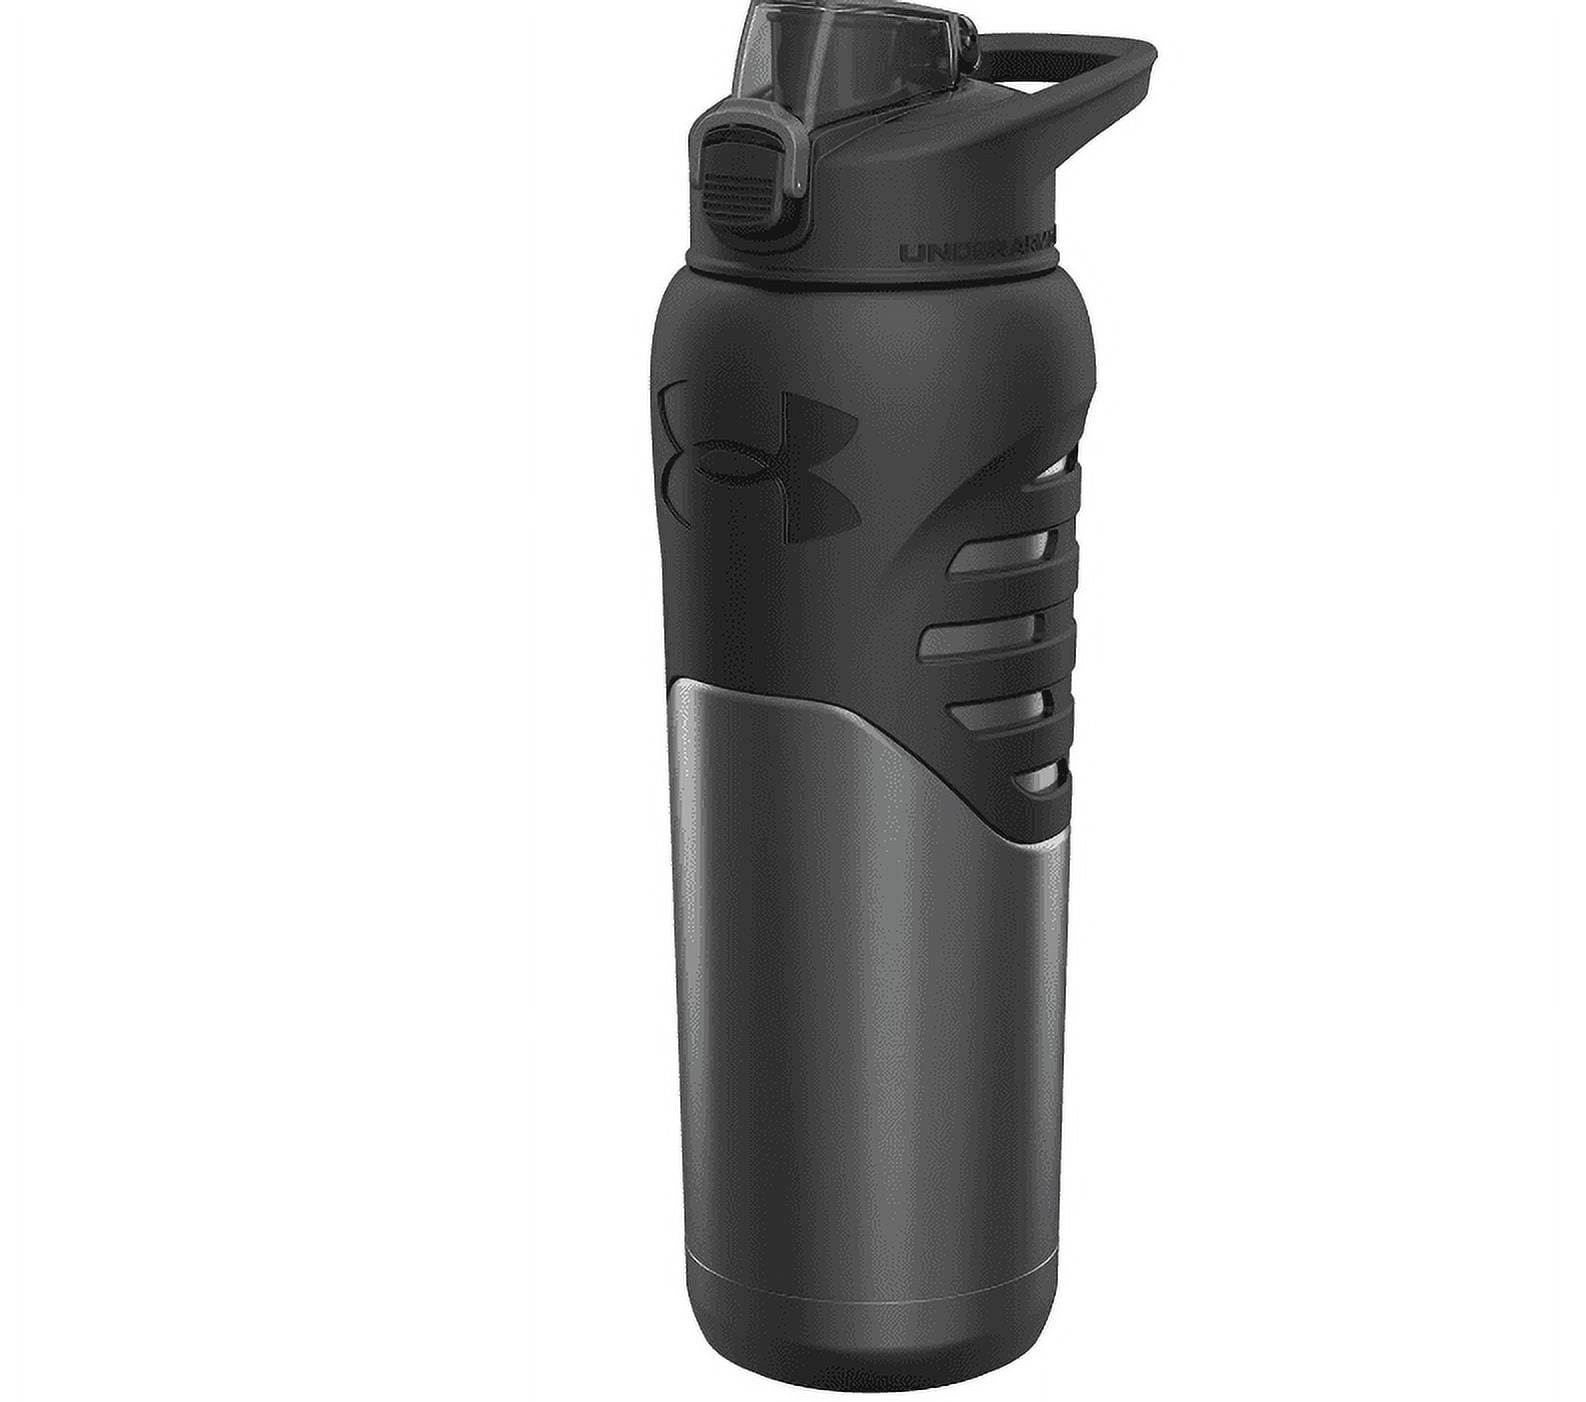 Under Armour Dominate Stainless Steel Water Bottle, 24oz, Silicon Body  Grip, Vacuum Insulated, Carabiner Hook Carry, Protective Cap, Leak Proof,  For